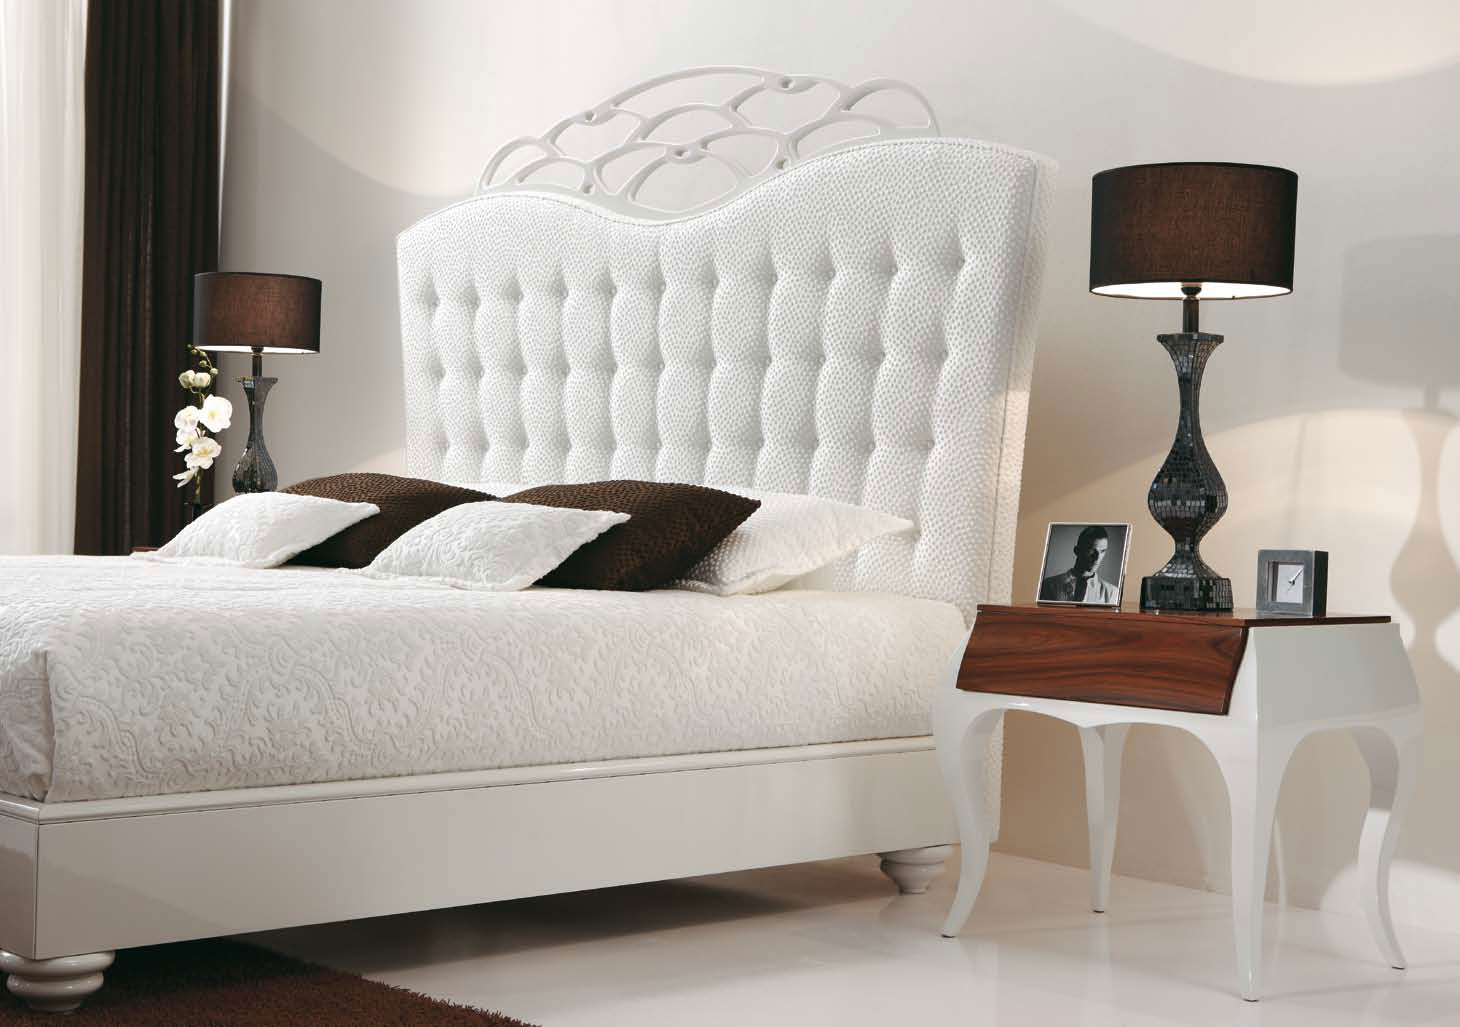 Luxury Bedroom with Beautiful White Bed by MobilFresno | DigsDigs